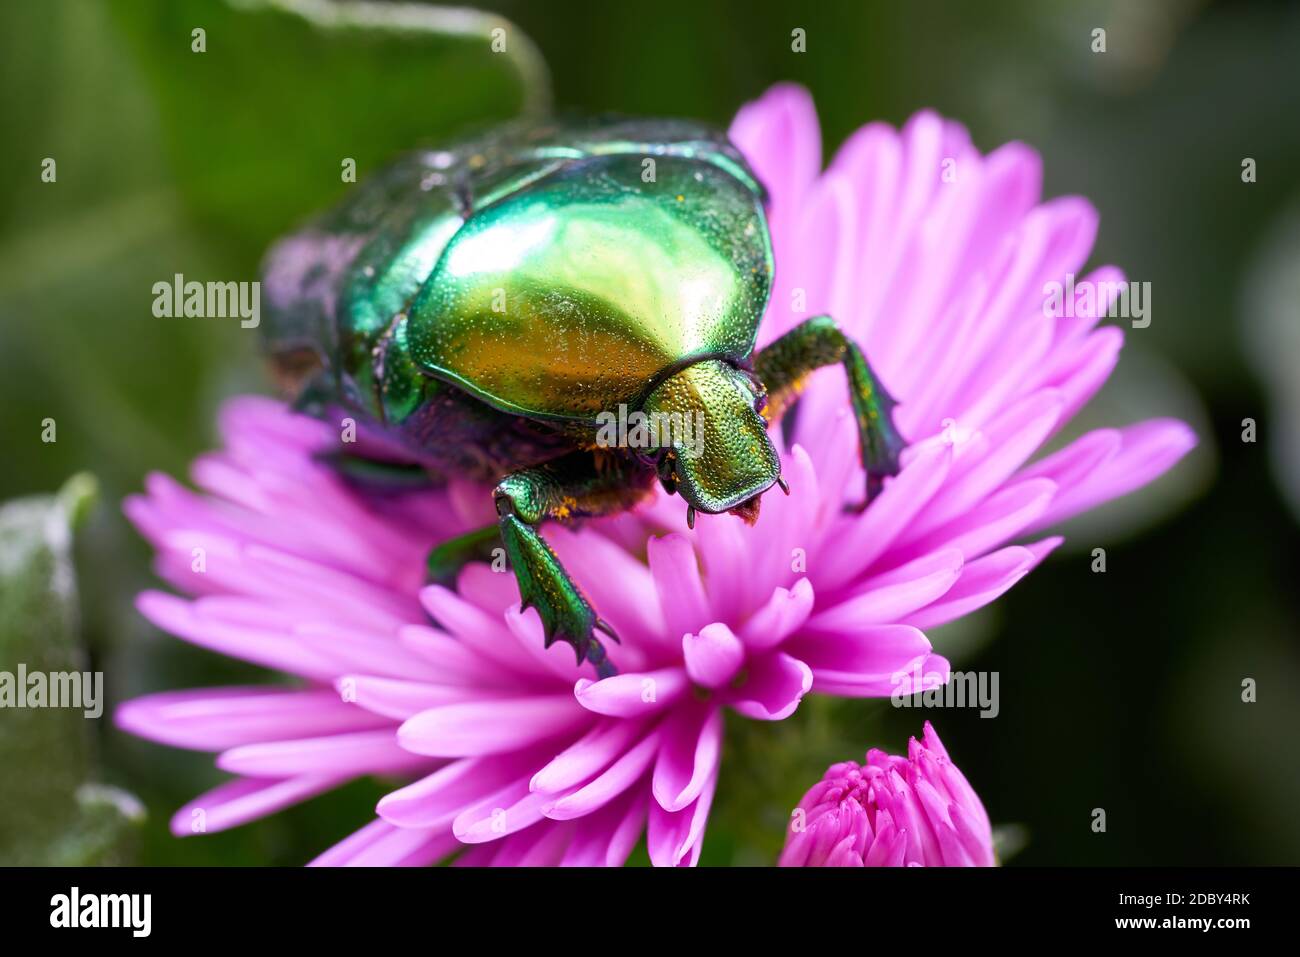 Rose beetle (Cetonia aurata) on a pink flower in the garden Stock Photo